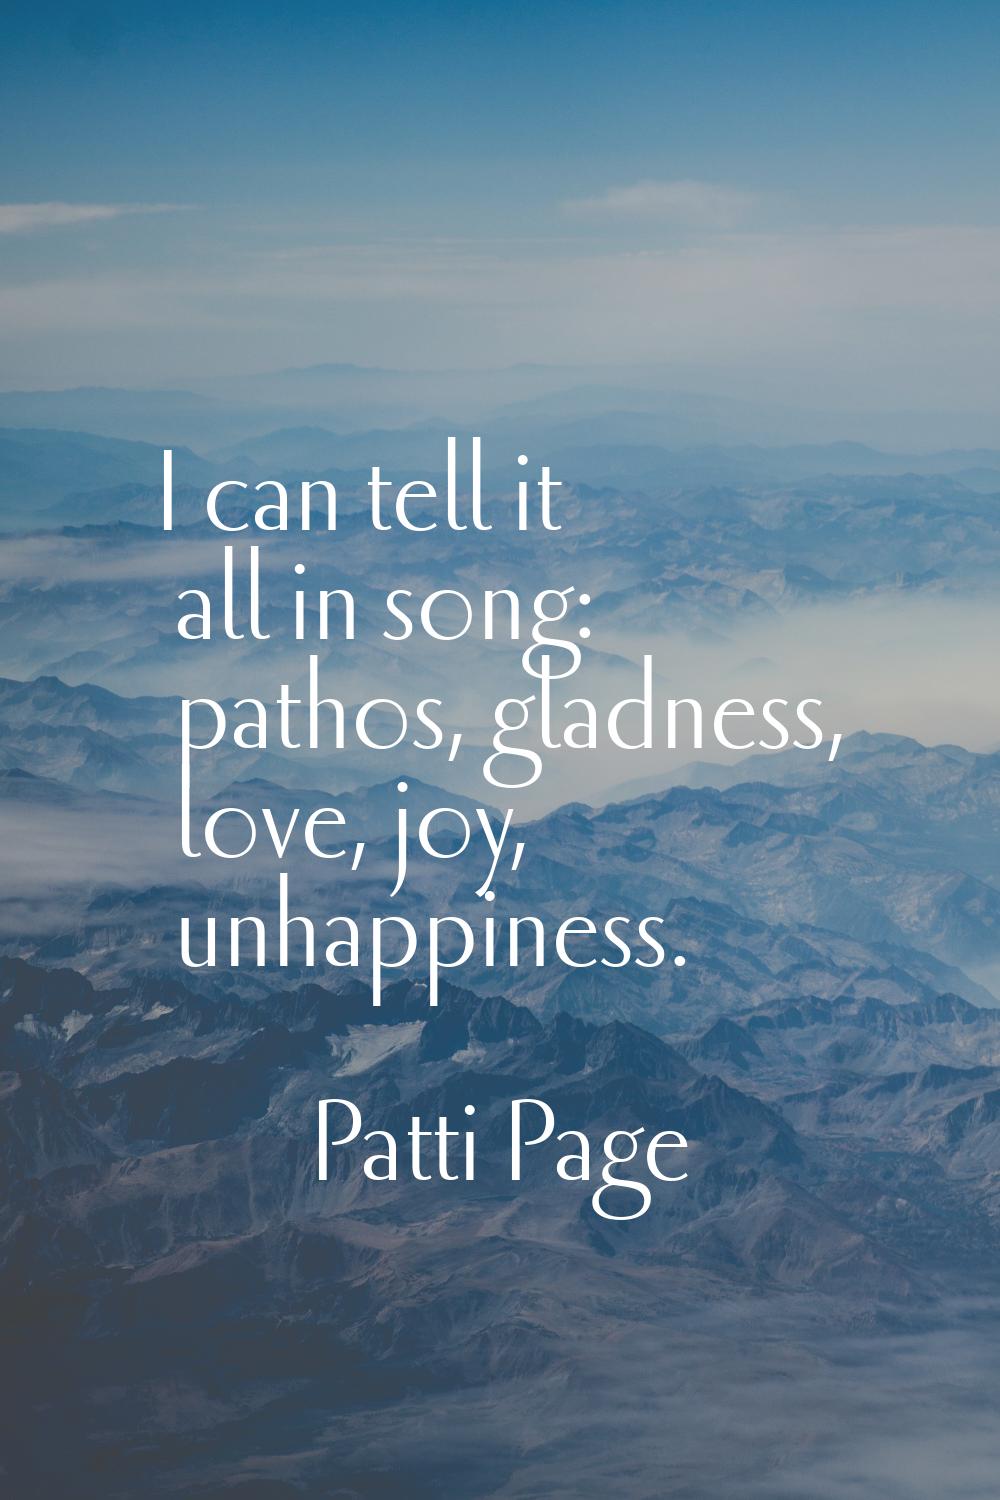 I can tell it all in song: pathos, gladness, love, joy, unhappiness.